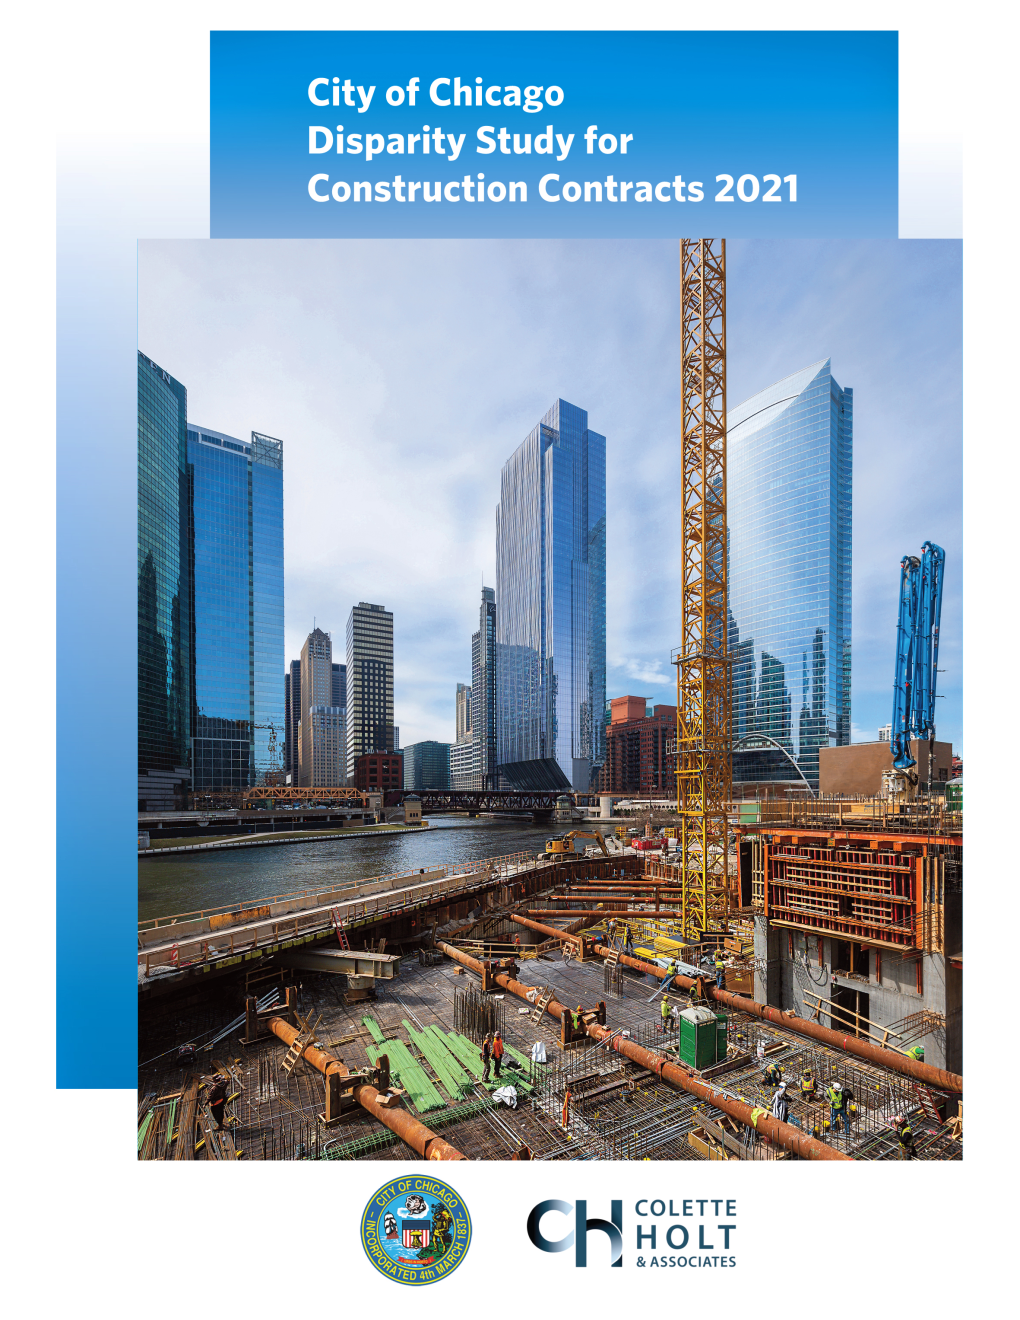 City of Chicago Disparity Study for Construction Contracts 2021